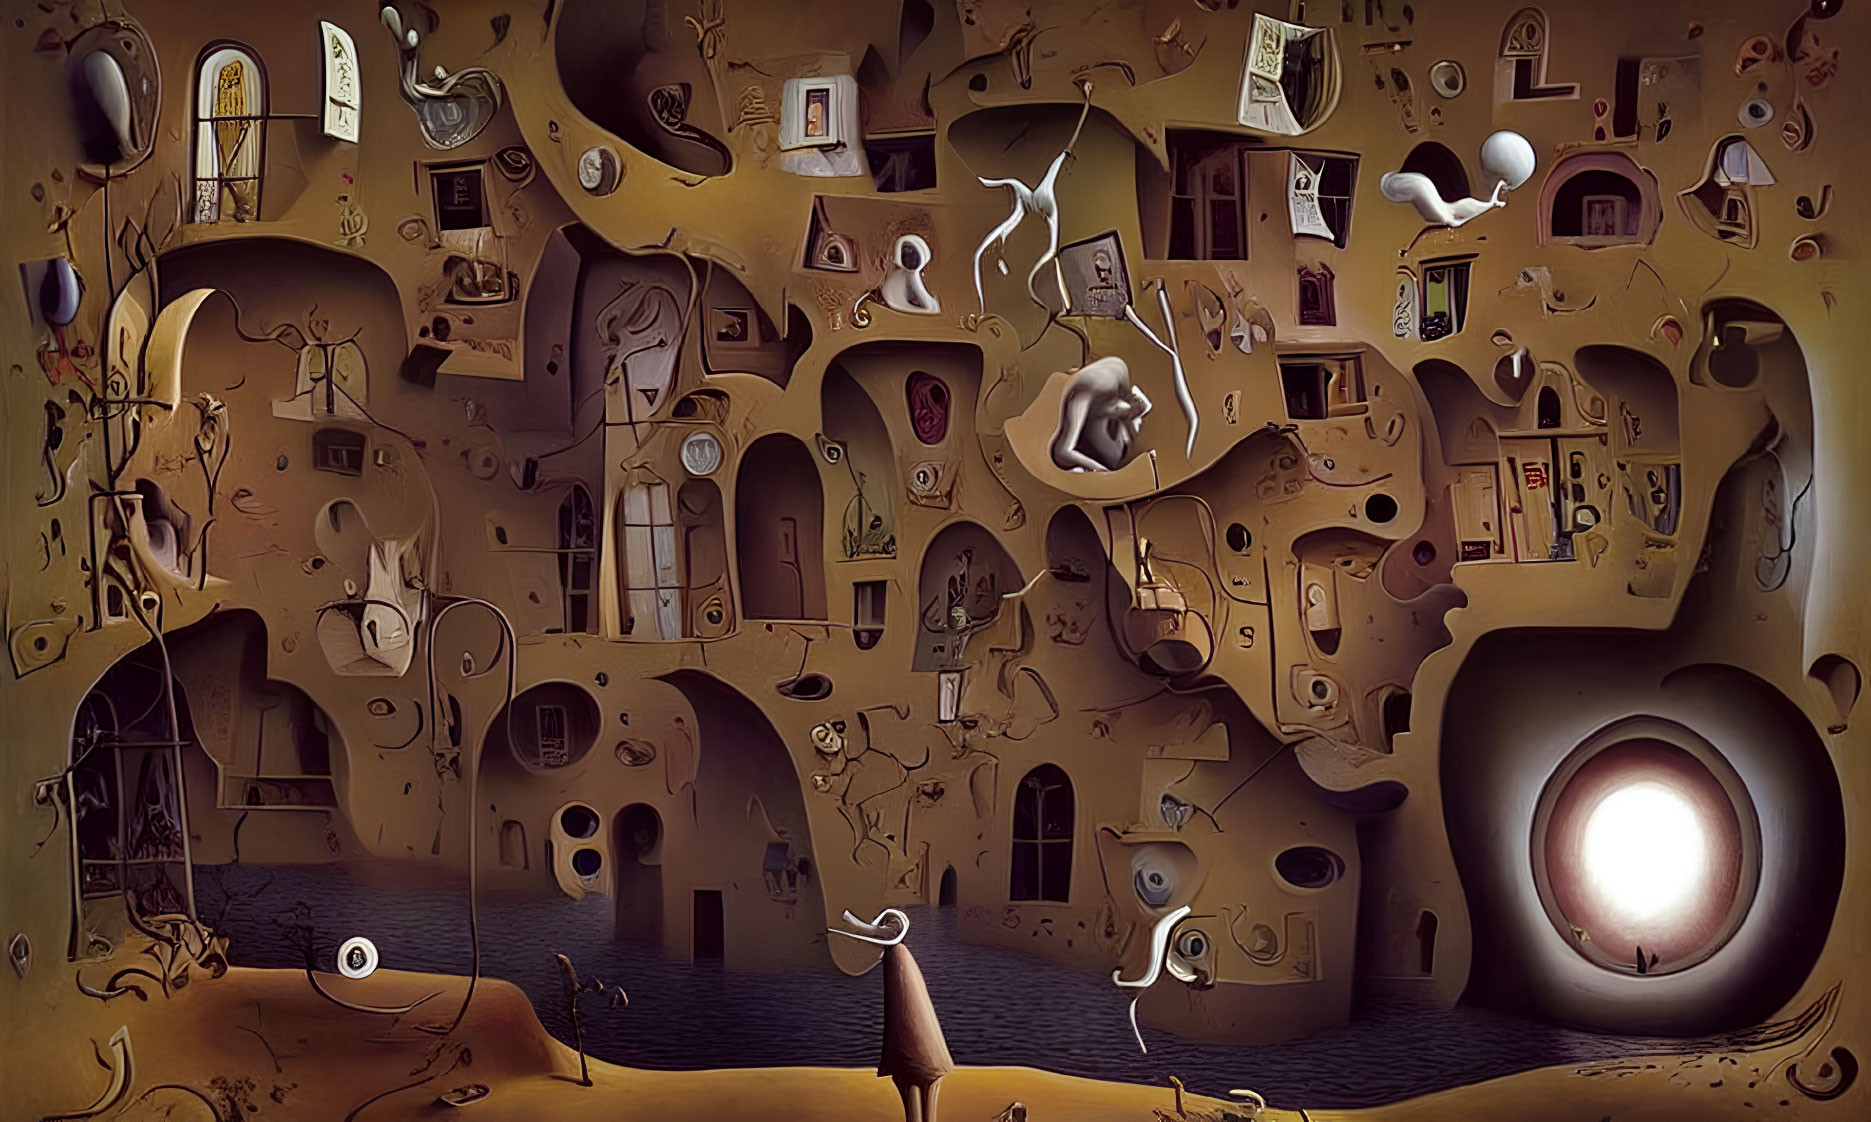 Surreal landscape with distorted shapes and floating objects in whimsical architecture